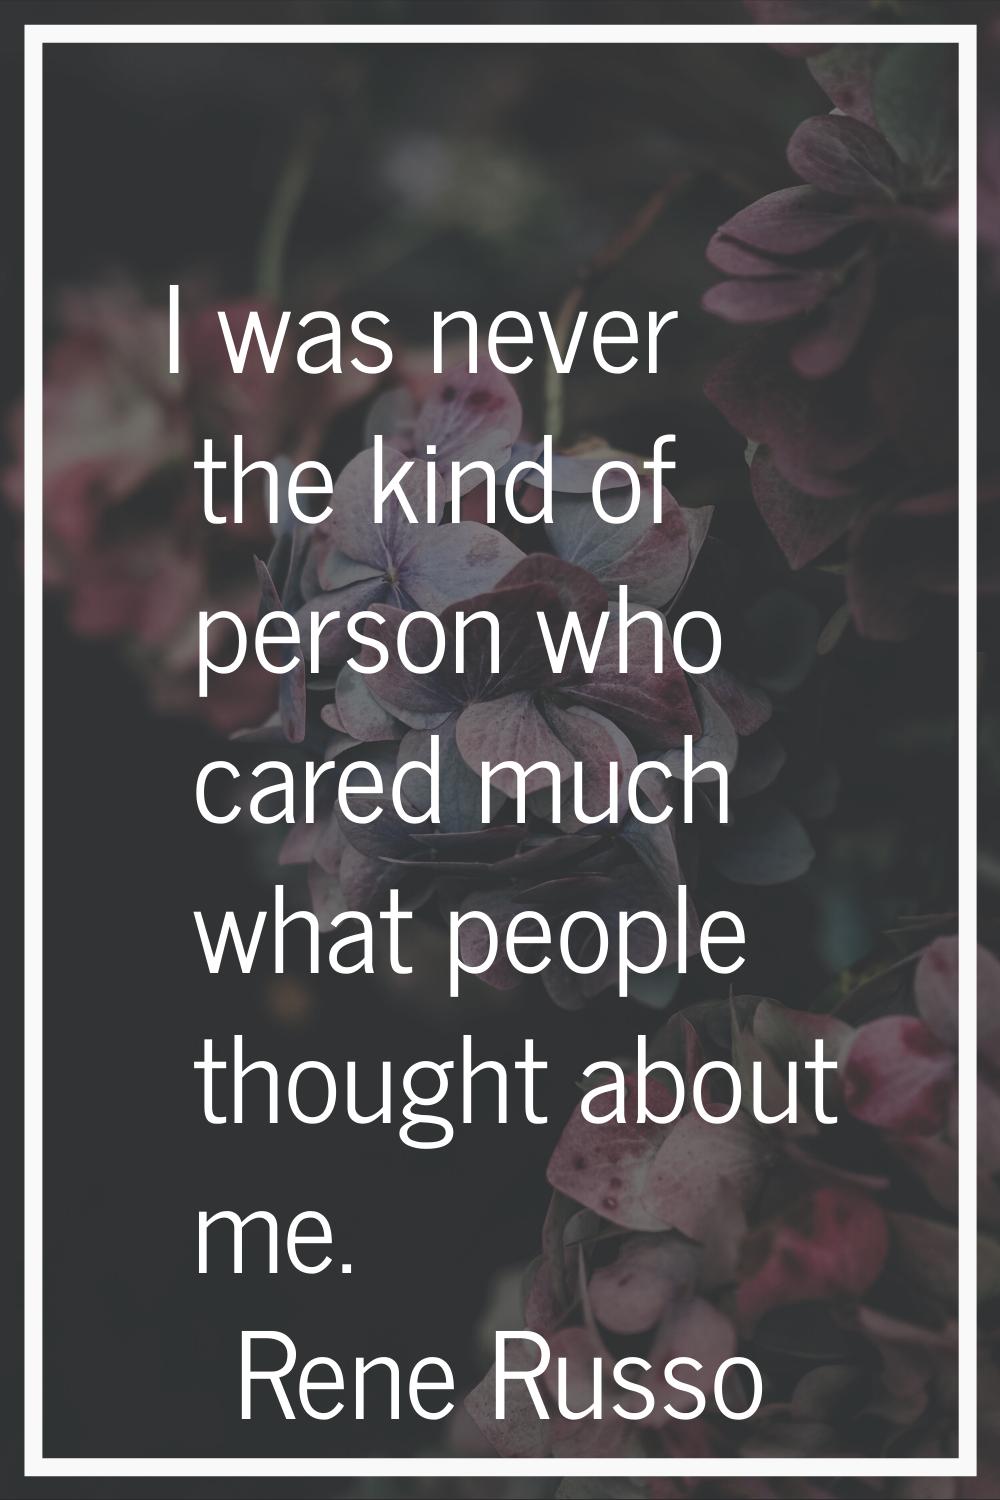 I was never the kind of person who cared much what people thought about me.